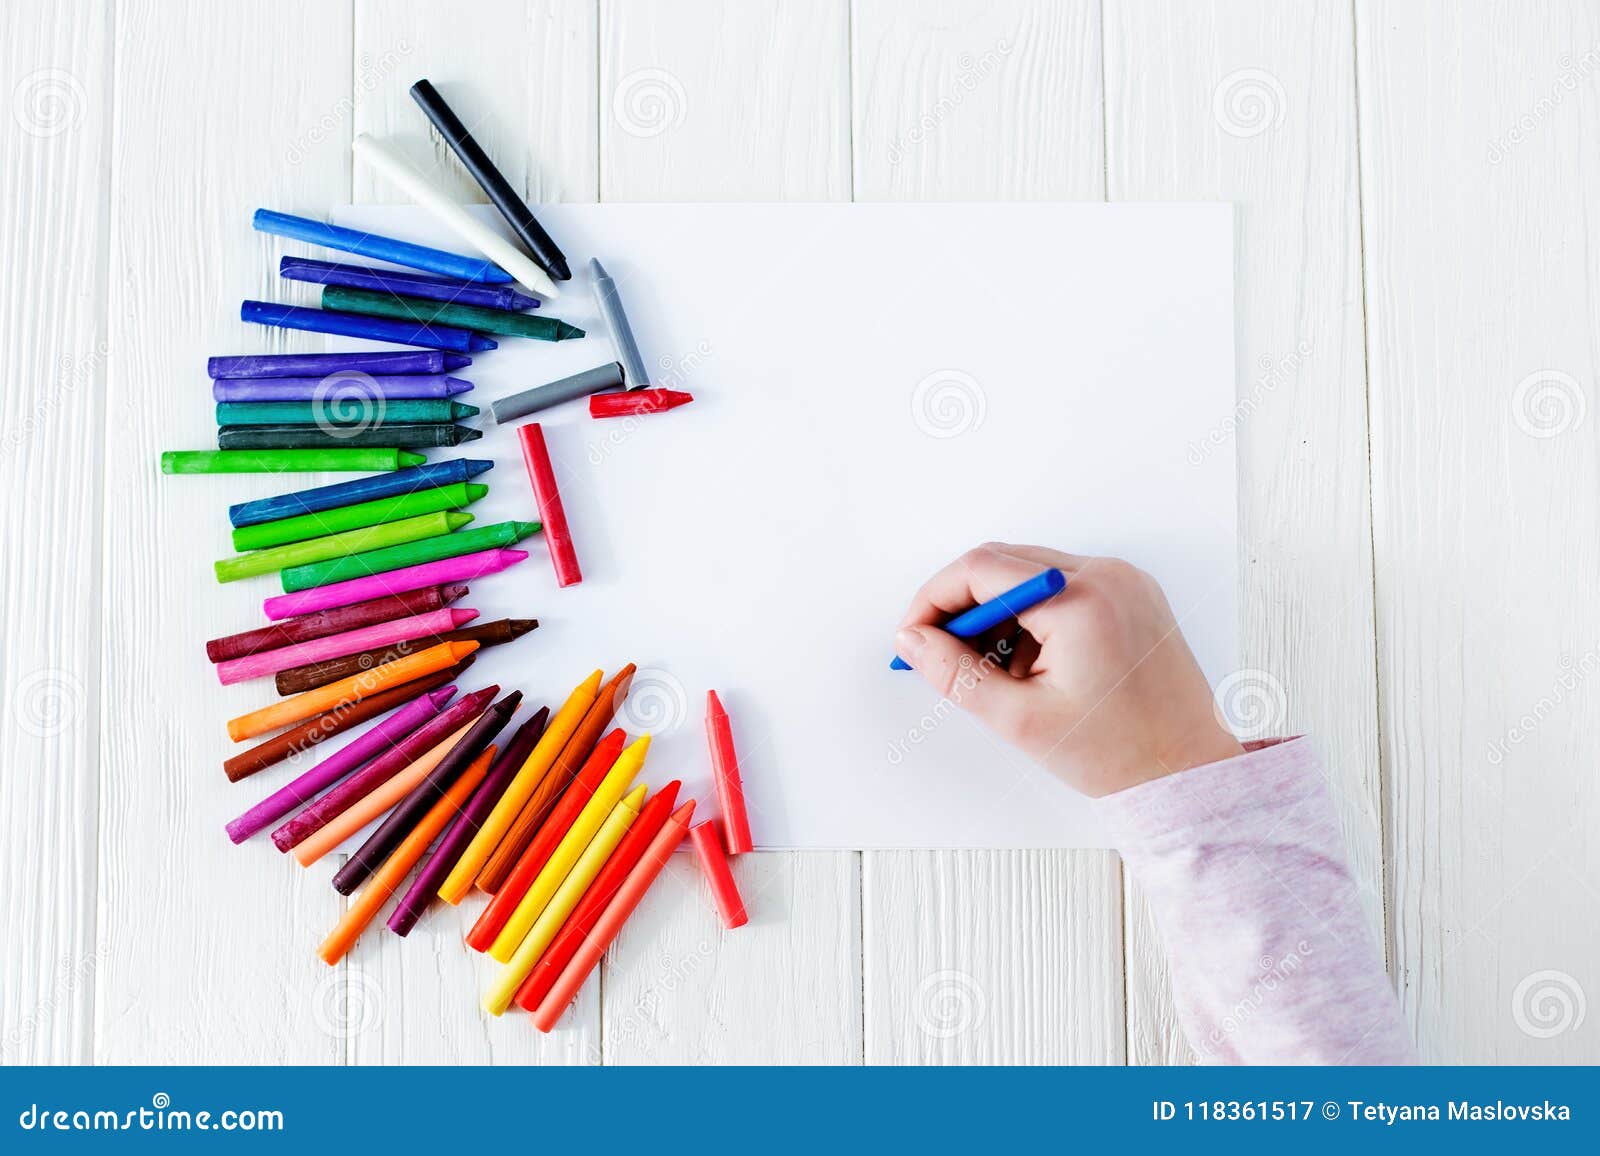 Kids Drawing On White Sheet Of Paper Background Stock Photo, Picture and  Royalty Free Image. Image 49661649.